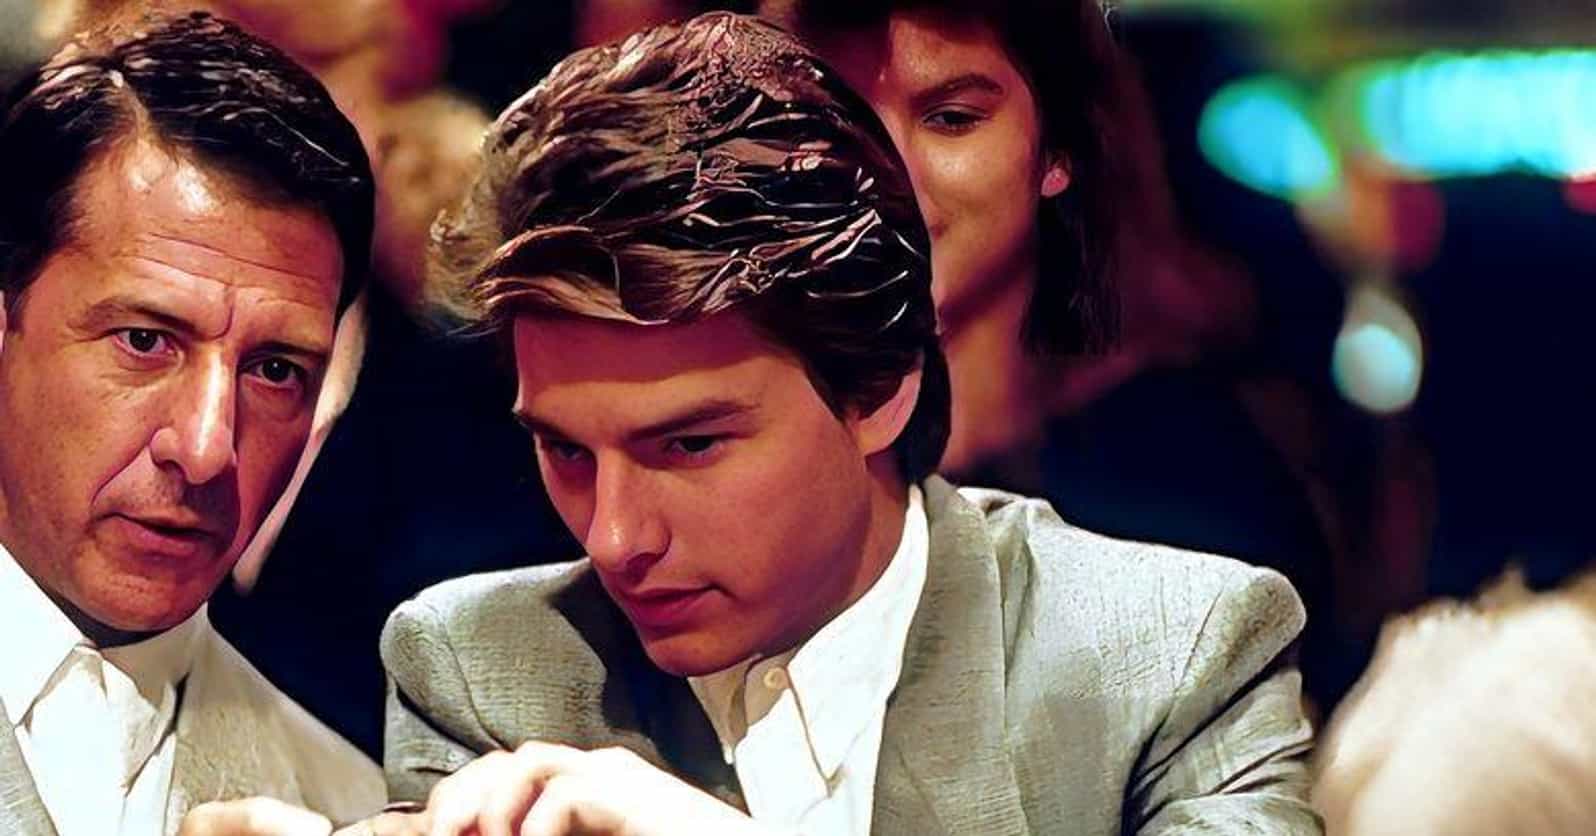 Tom Cruise's Best 80s Movie Roles, Ranked